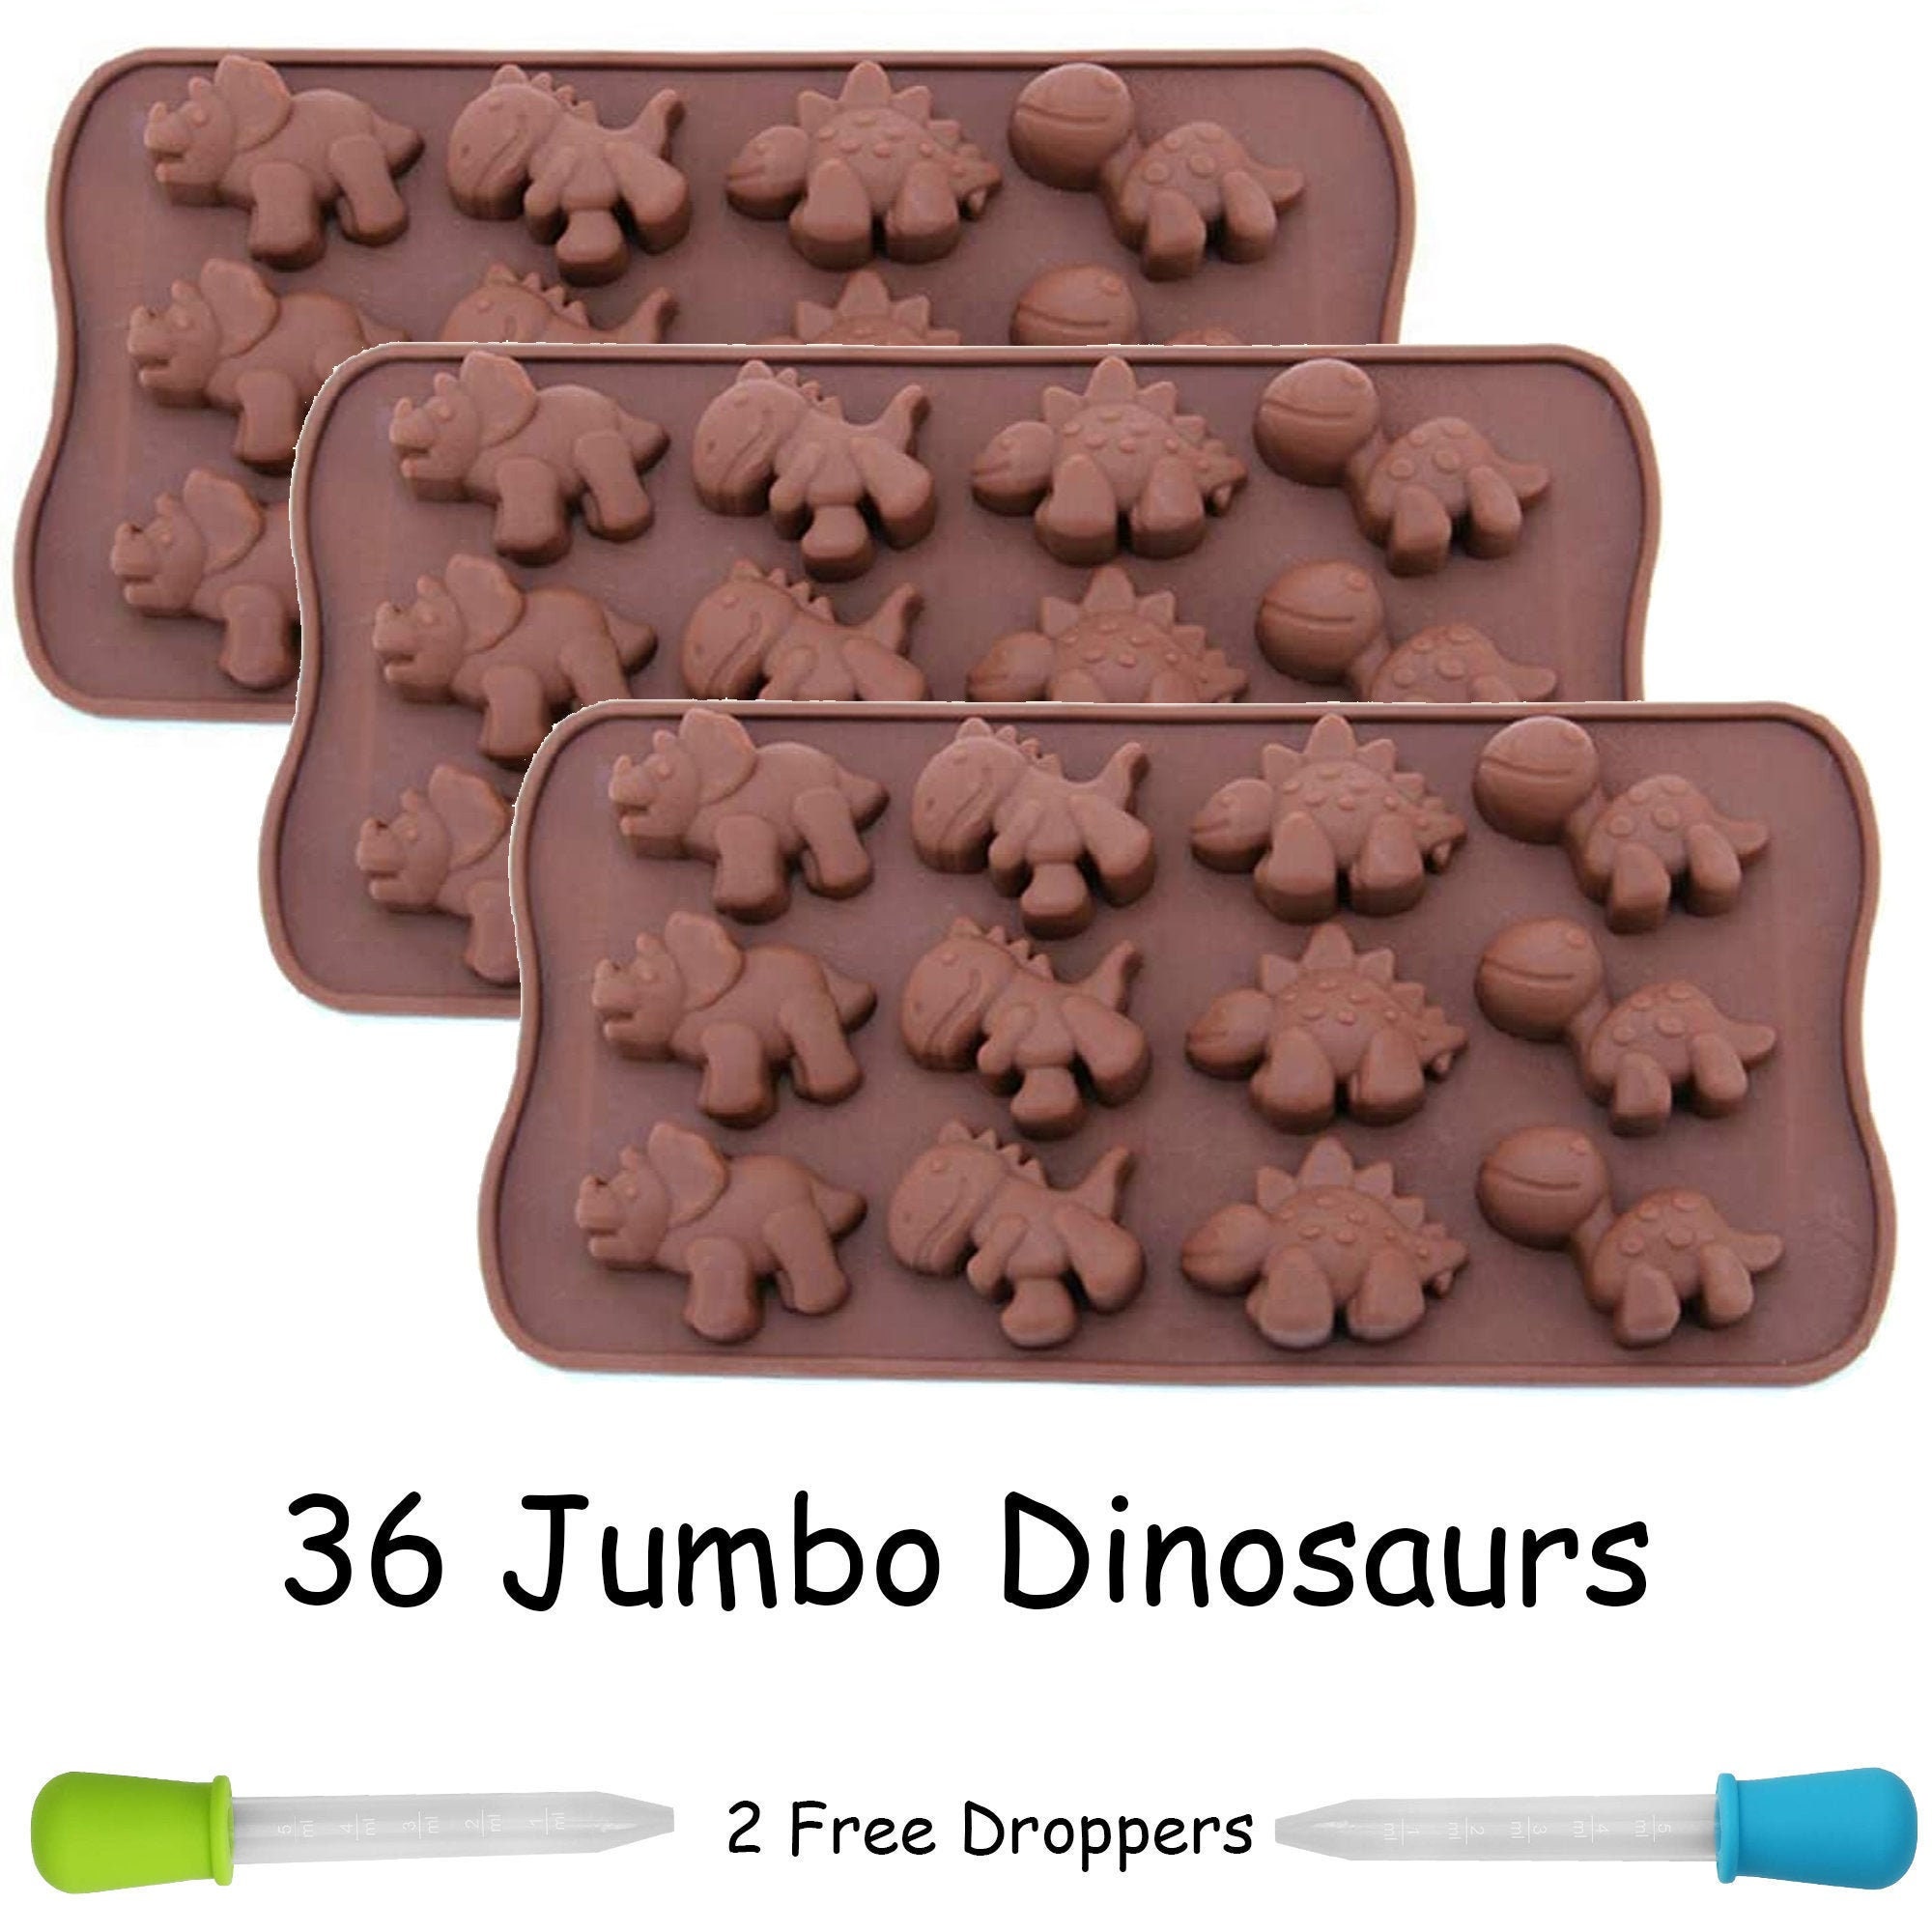 Stareal 2pcs Dinosaur Molds Silicone, Dinosaur Candy Chocolate Molds,  Animal Dinosaur Jello Molds Silicone for Children, Dino Cookie Cutters  Molds